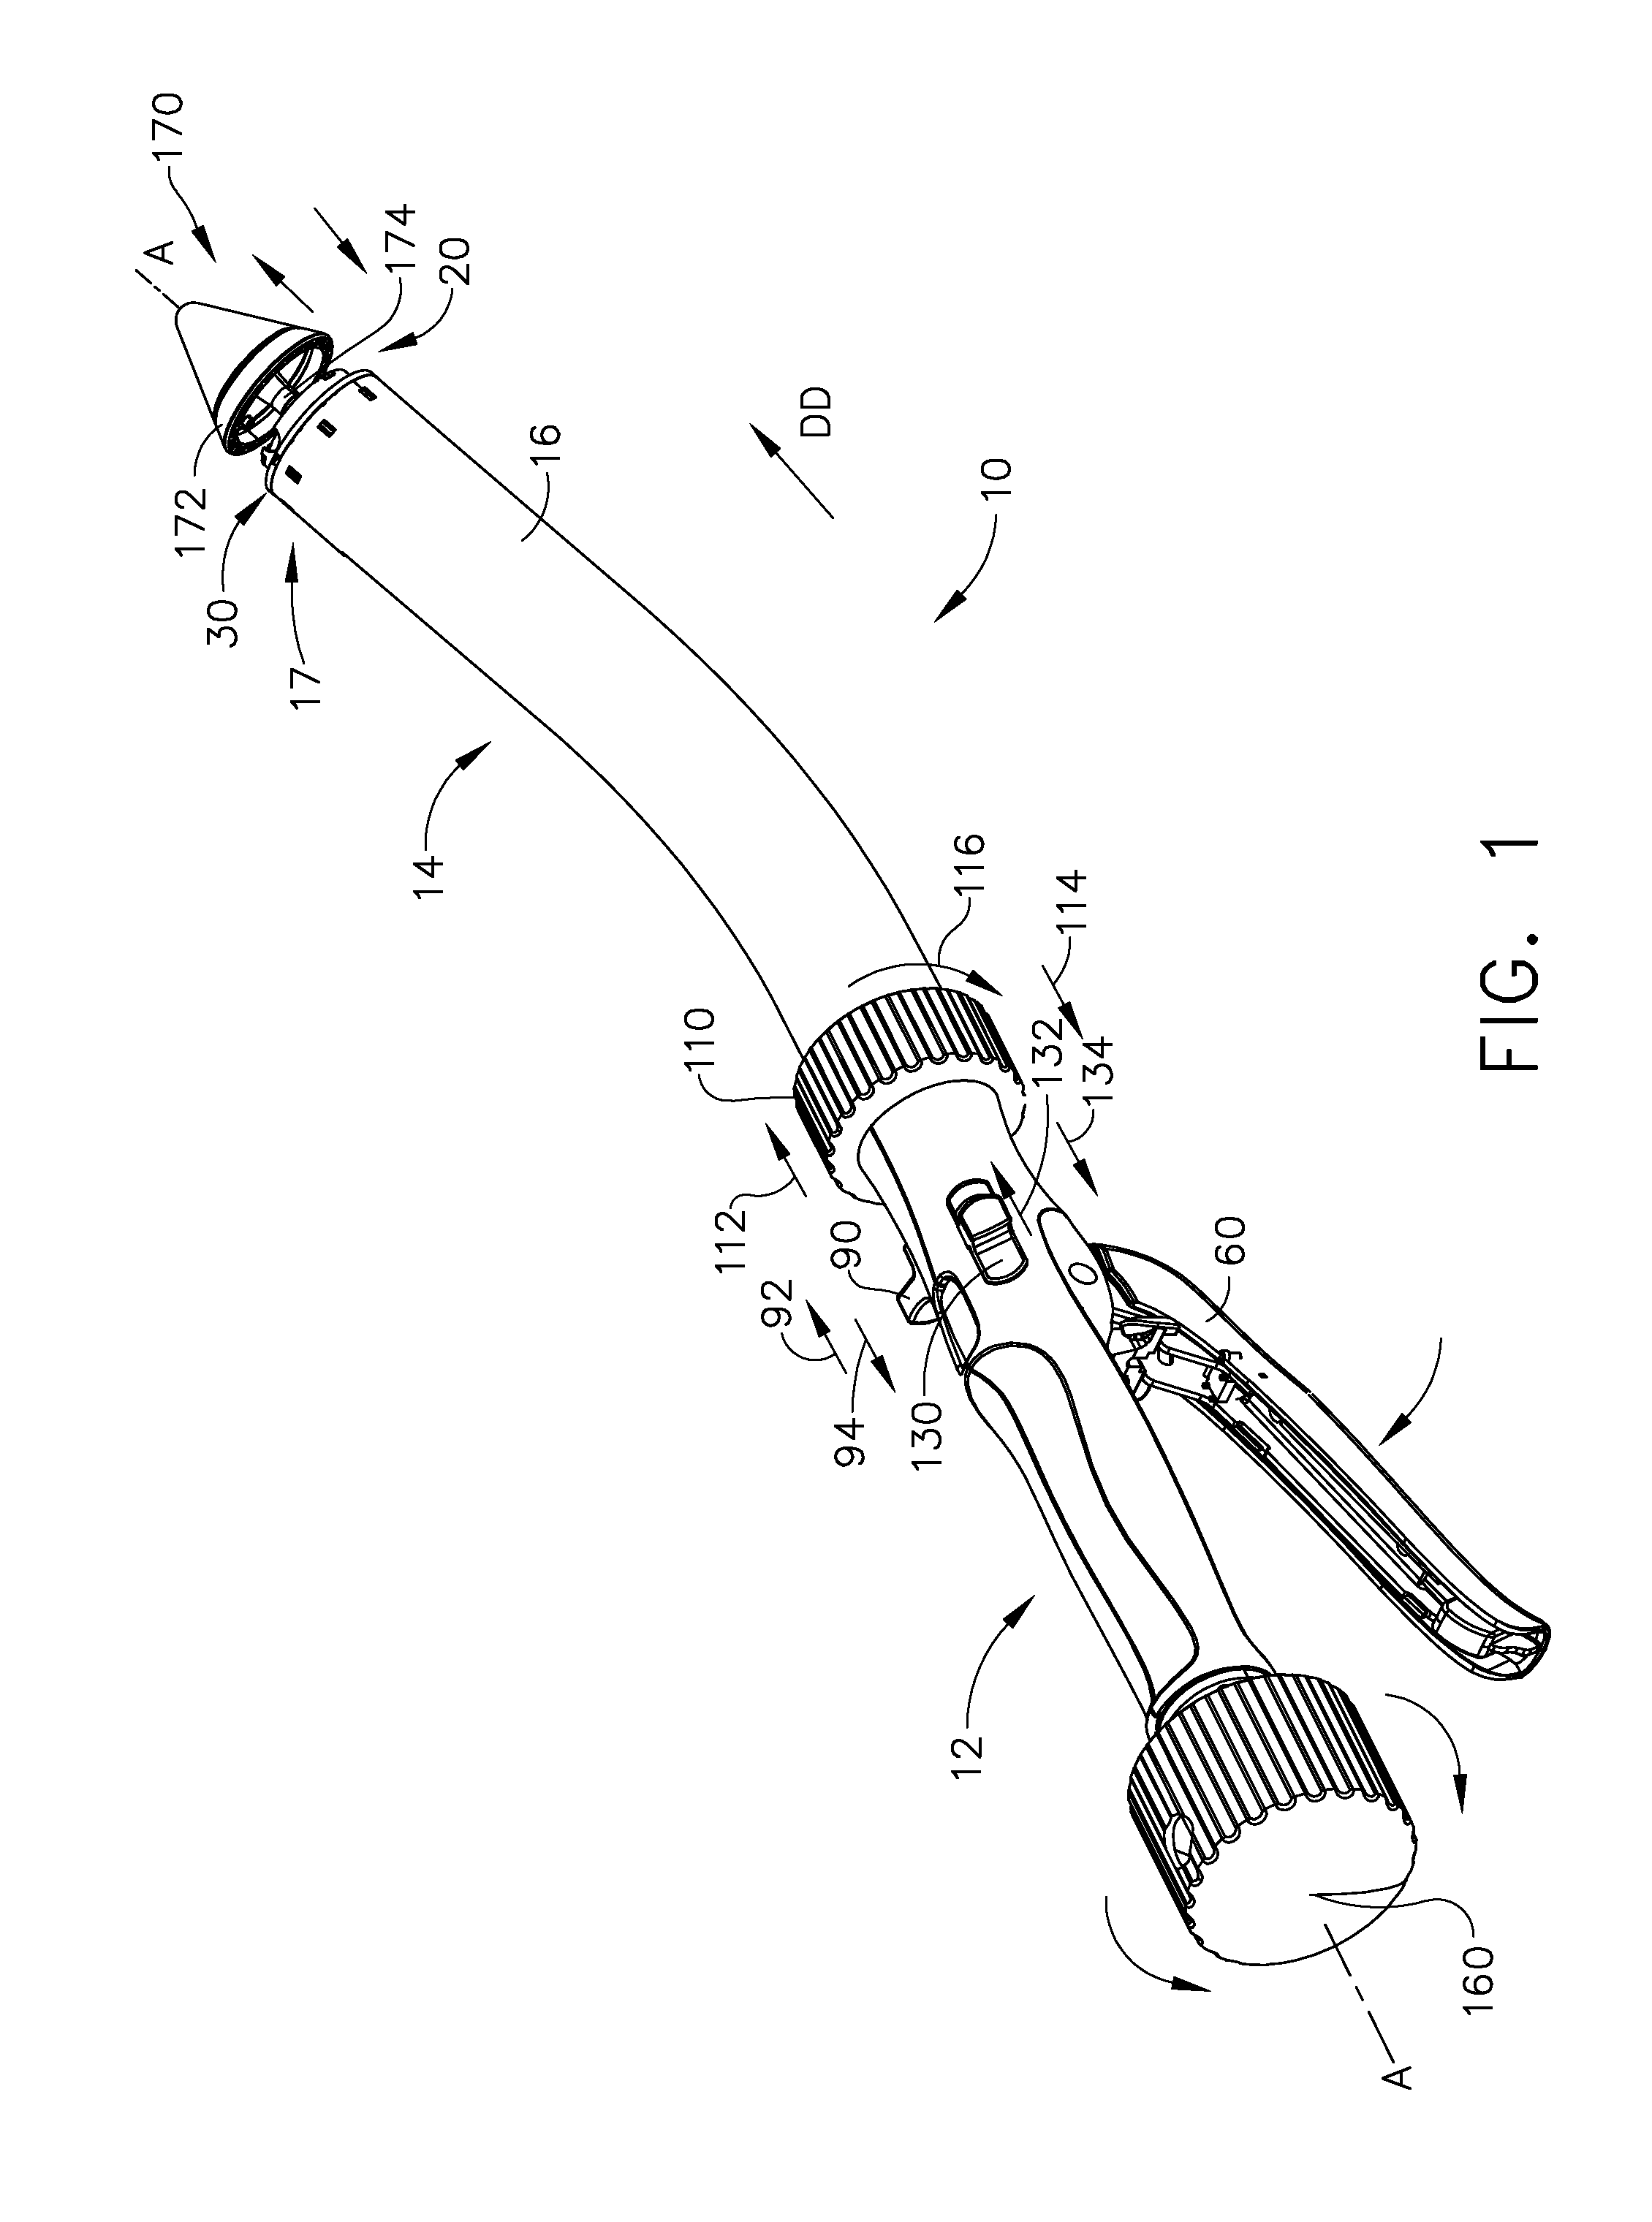 Apparatus and methods for protecting adjacent structures during the insertion of a surgical instrument into a tubular organ